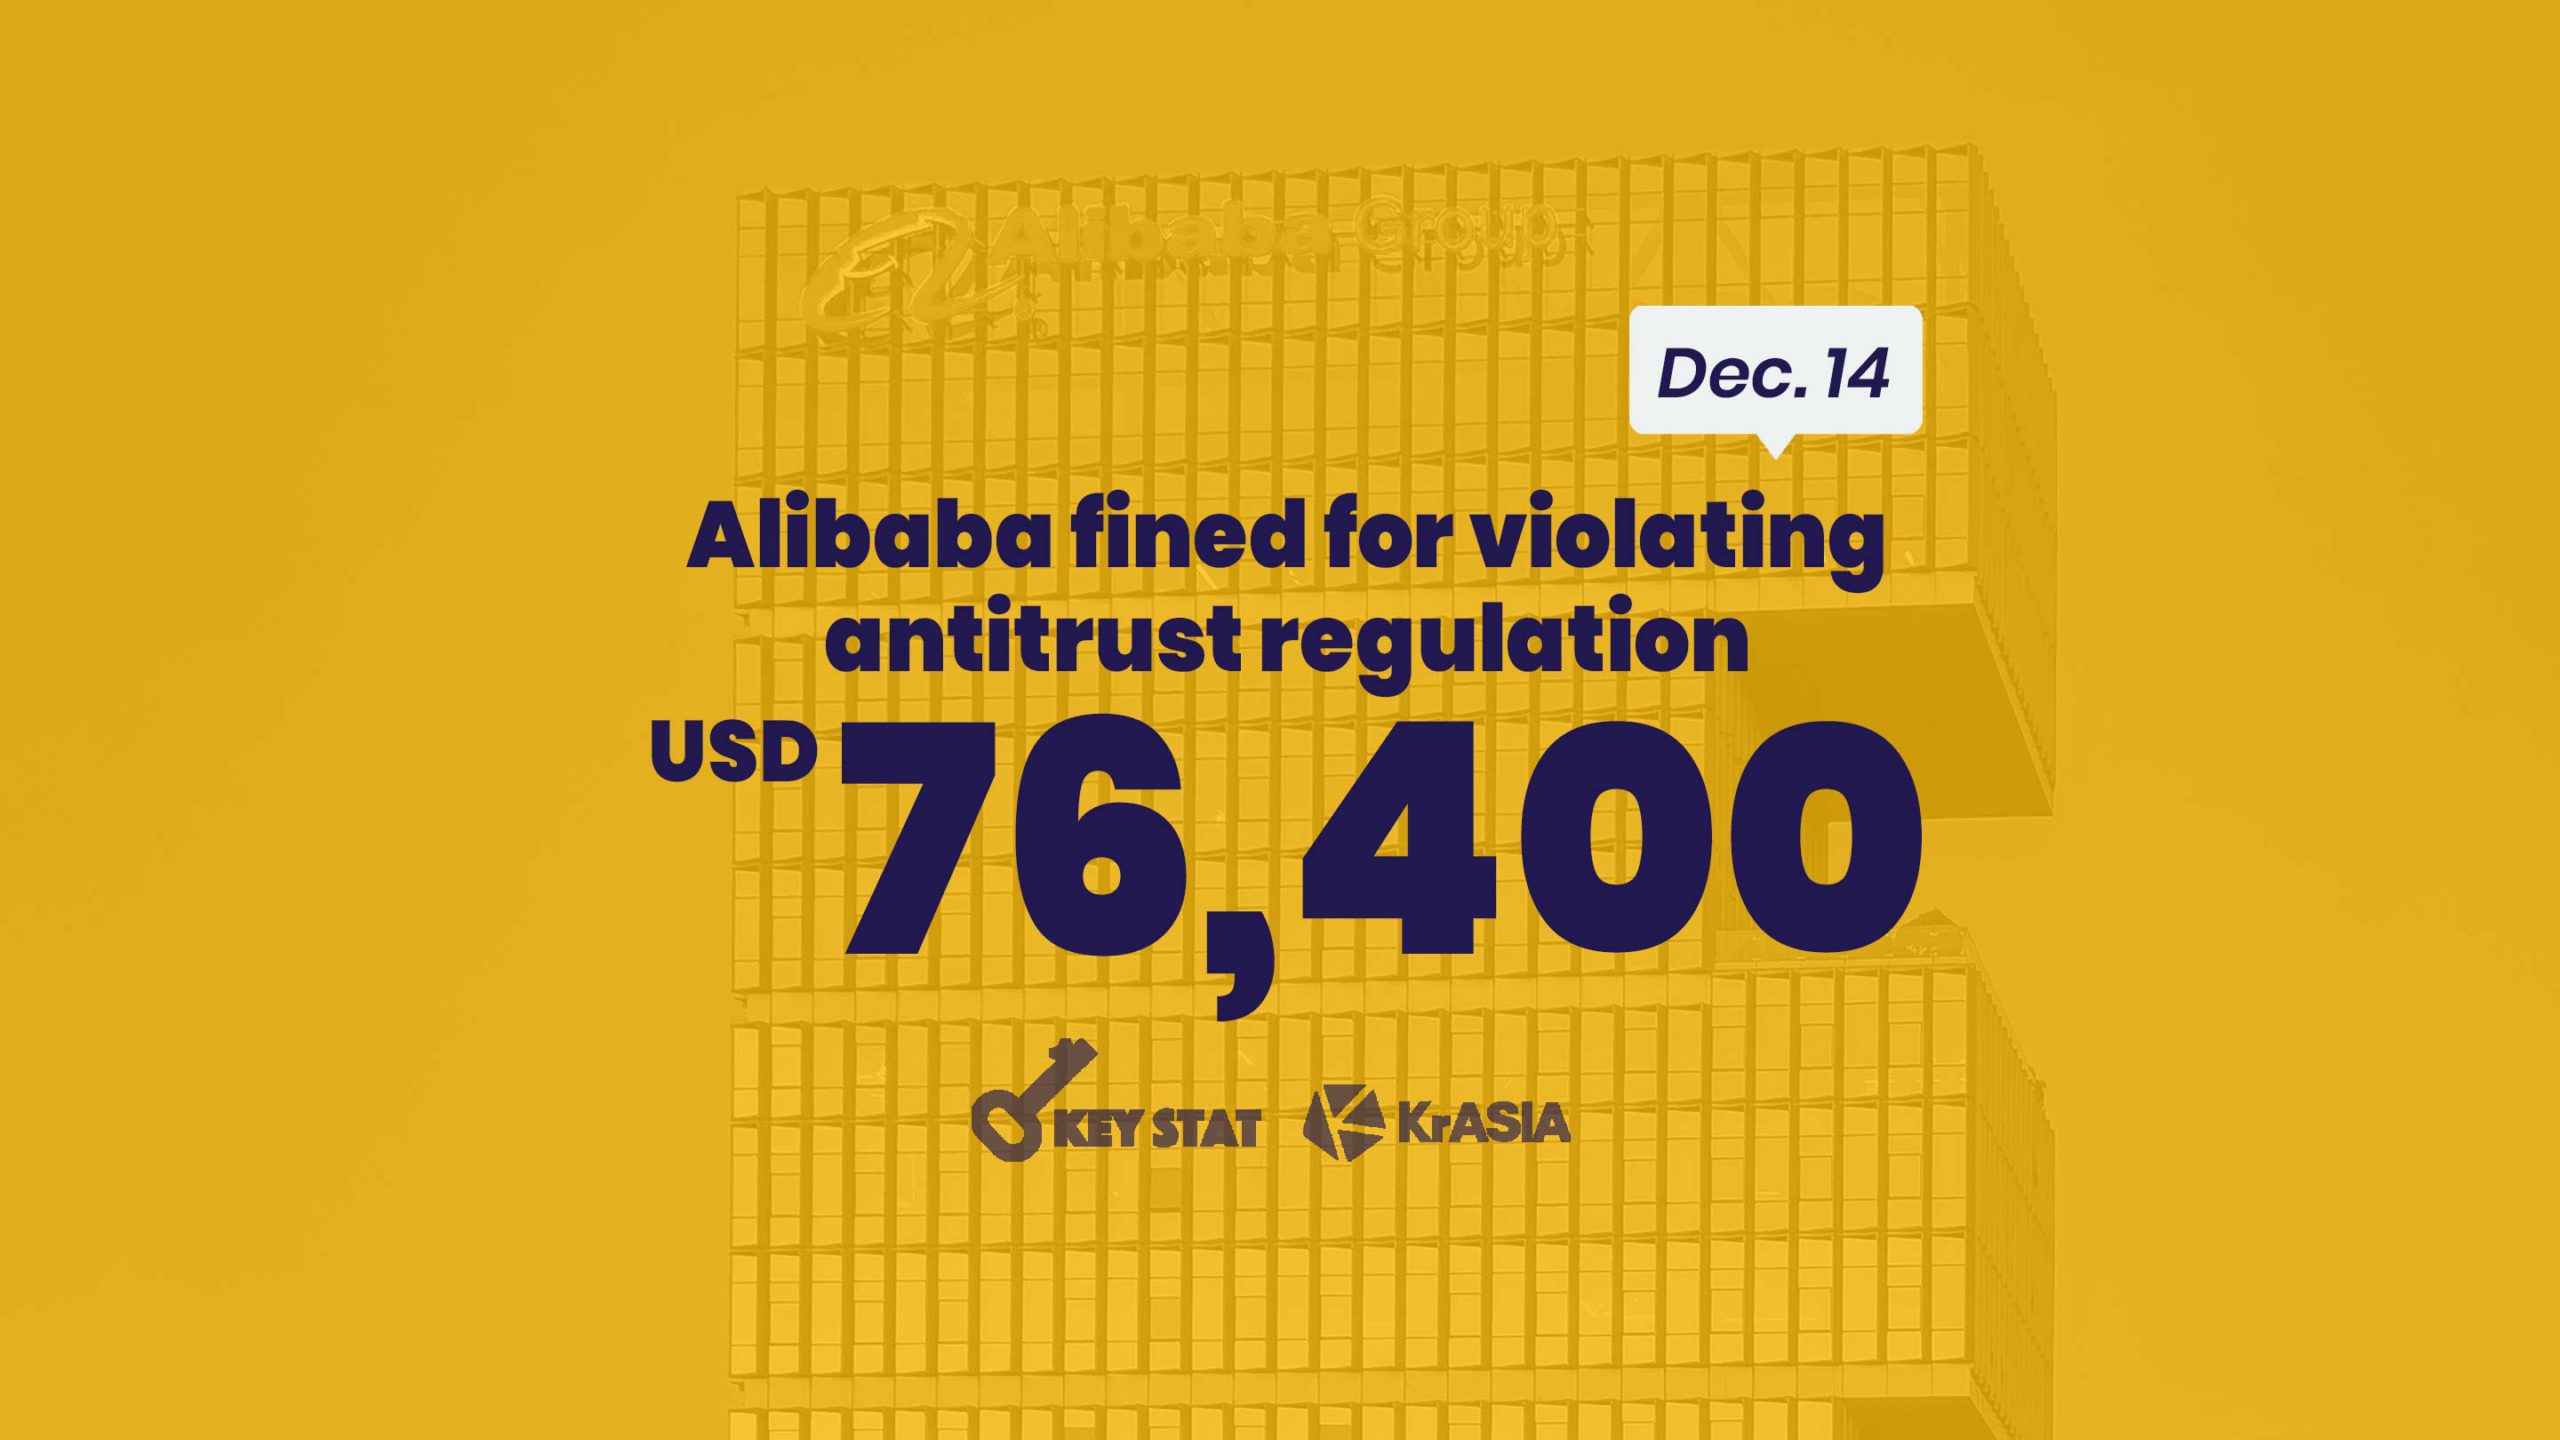 KEY STAT | Alibaba, China Literature, and Hive Box fined by market regulator for violating anti-trust laws